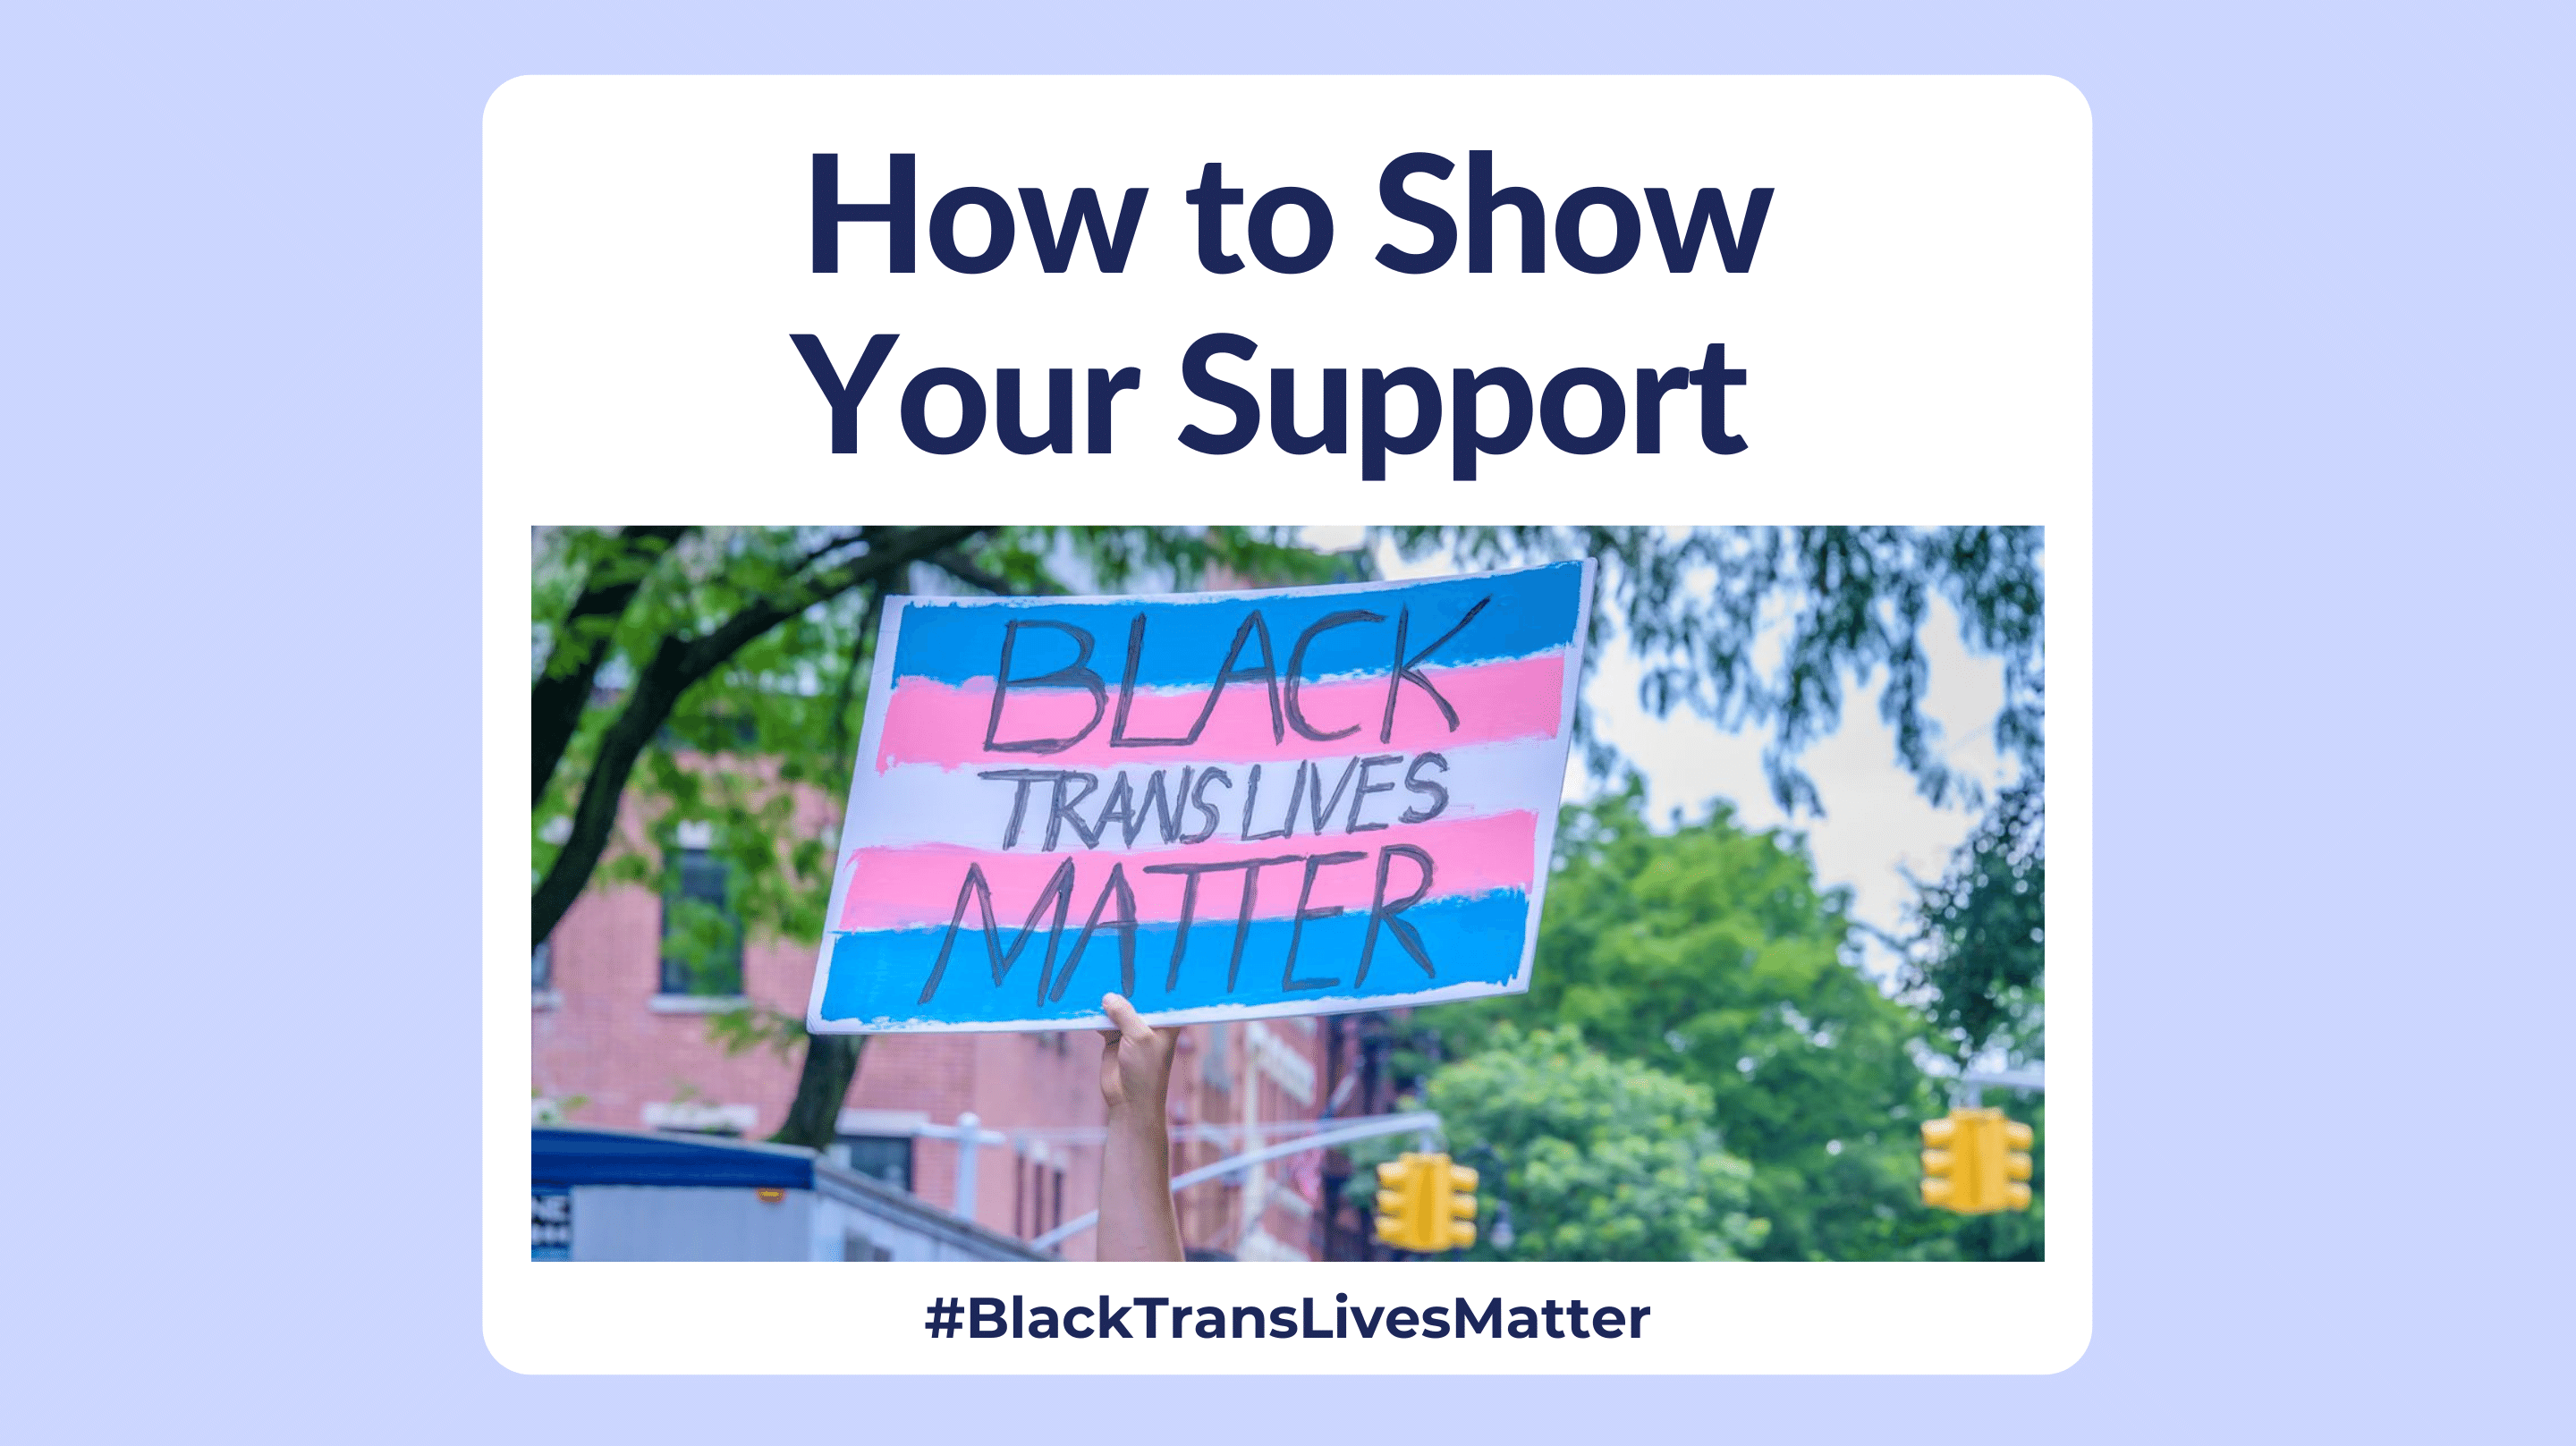 Supporting the Black Trans Lives Matter Movement